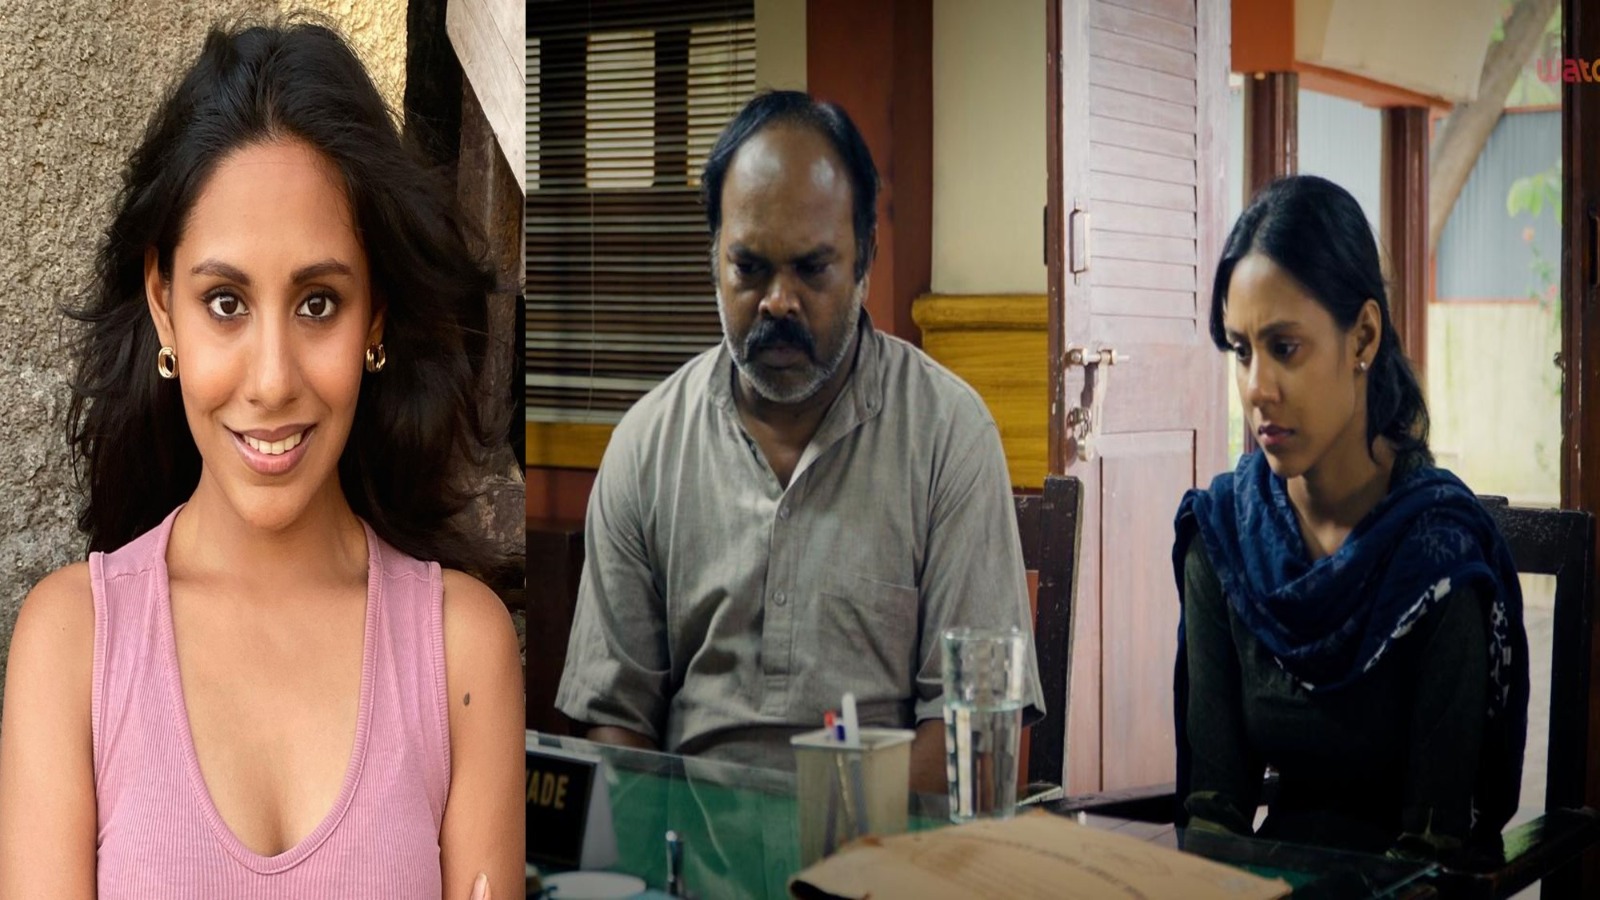 State v/s Ahuja actress Anurekha Bhagat shares her experiences!